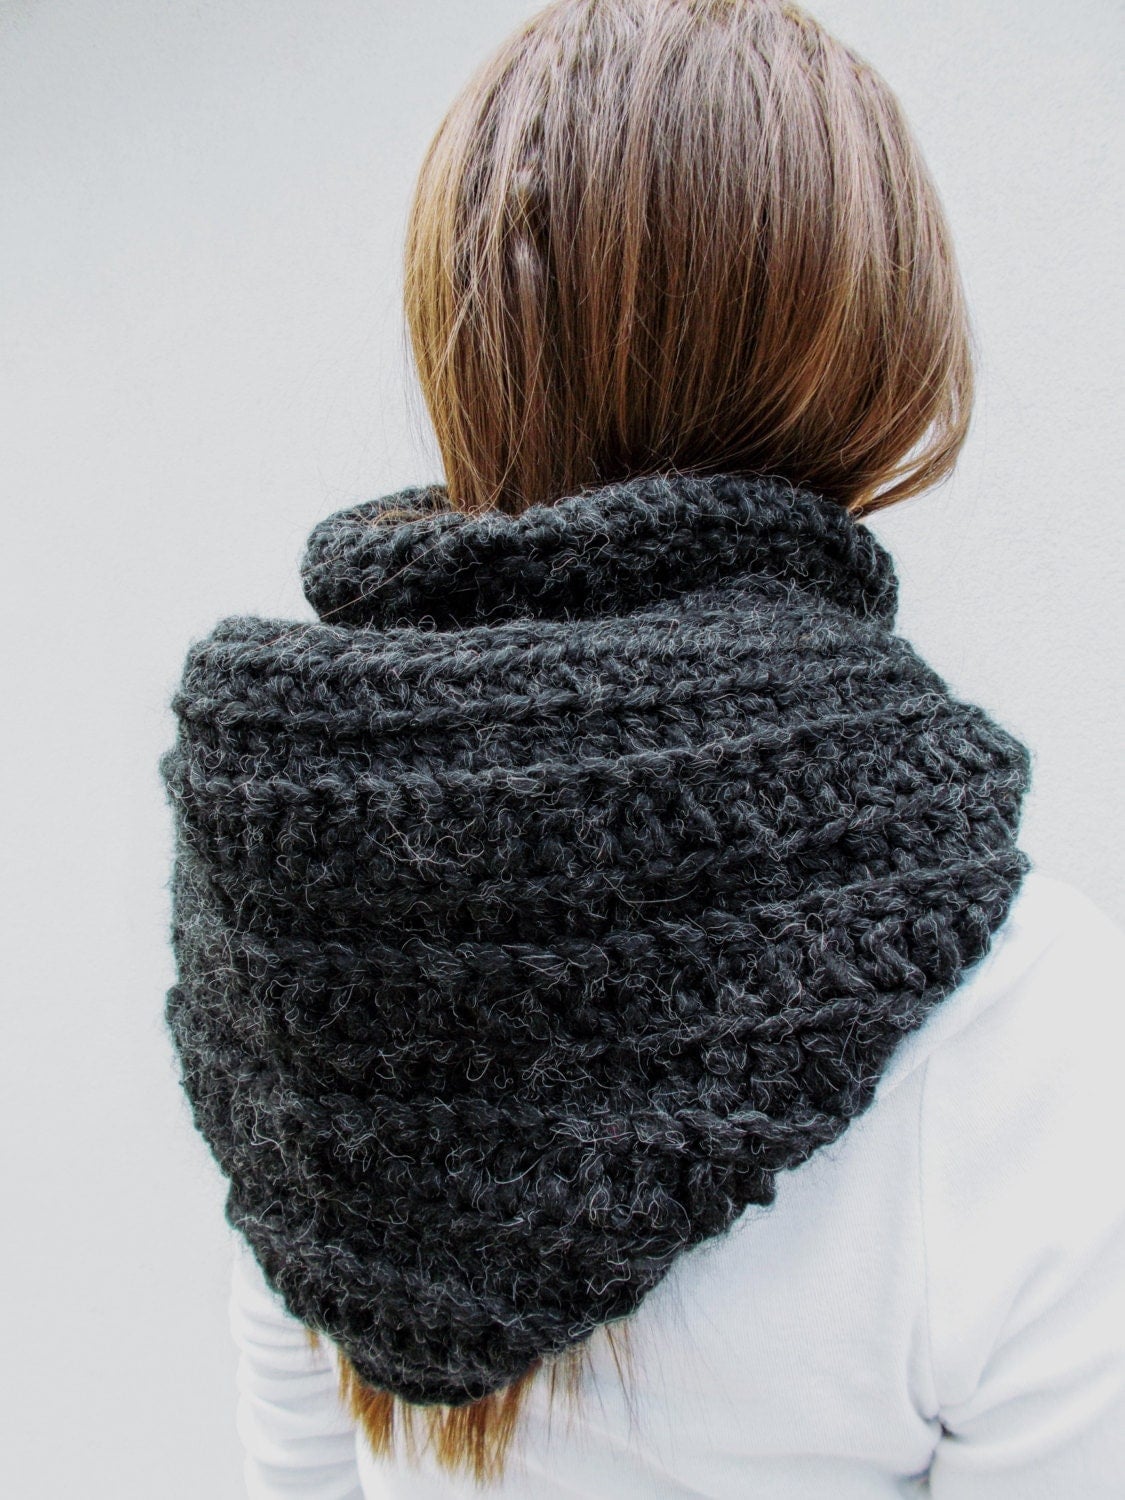 BLACK HOODED SCARF/Crochet Slouchy Cowl In Charcoal Black